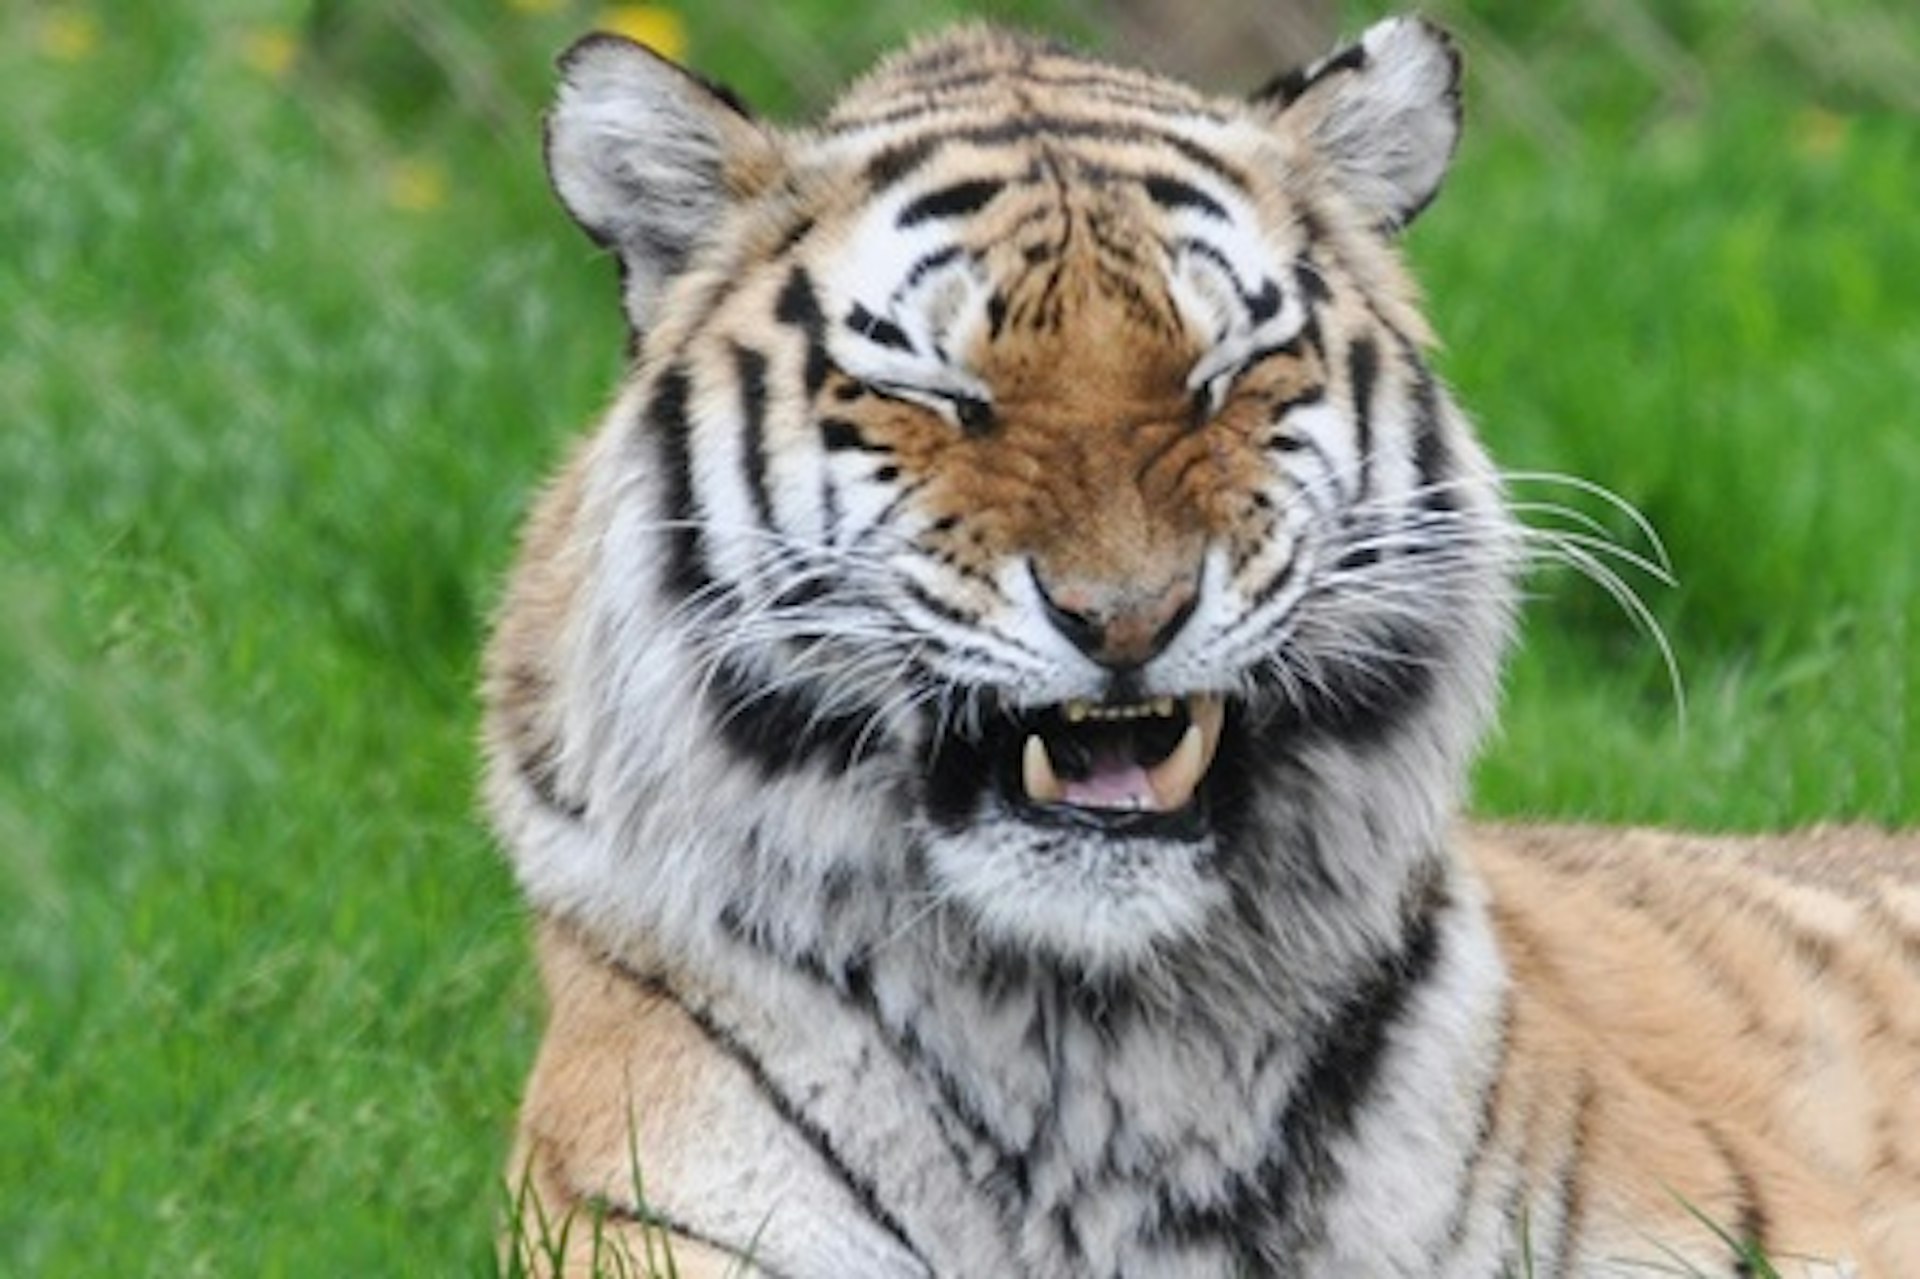 Tiger Encounter for Two at Dartmoor Zoo 4